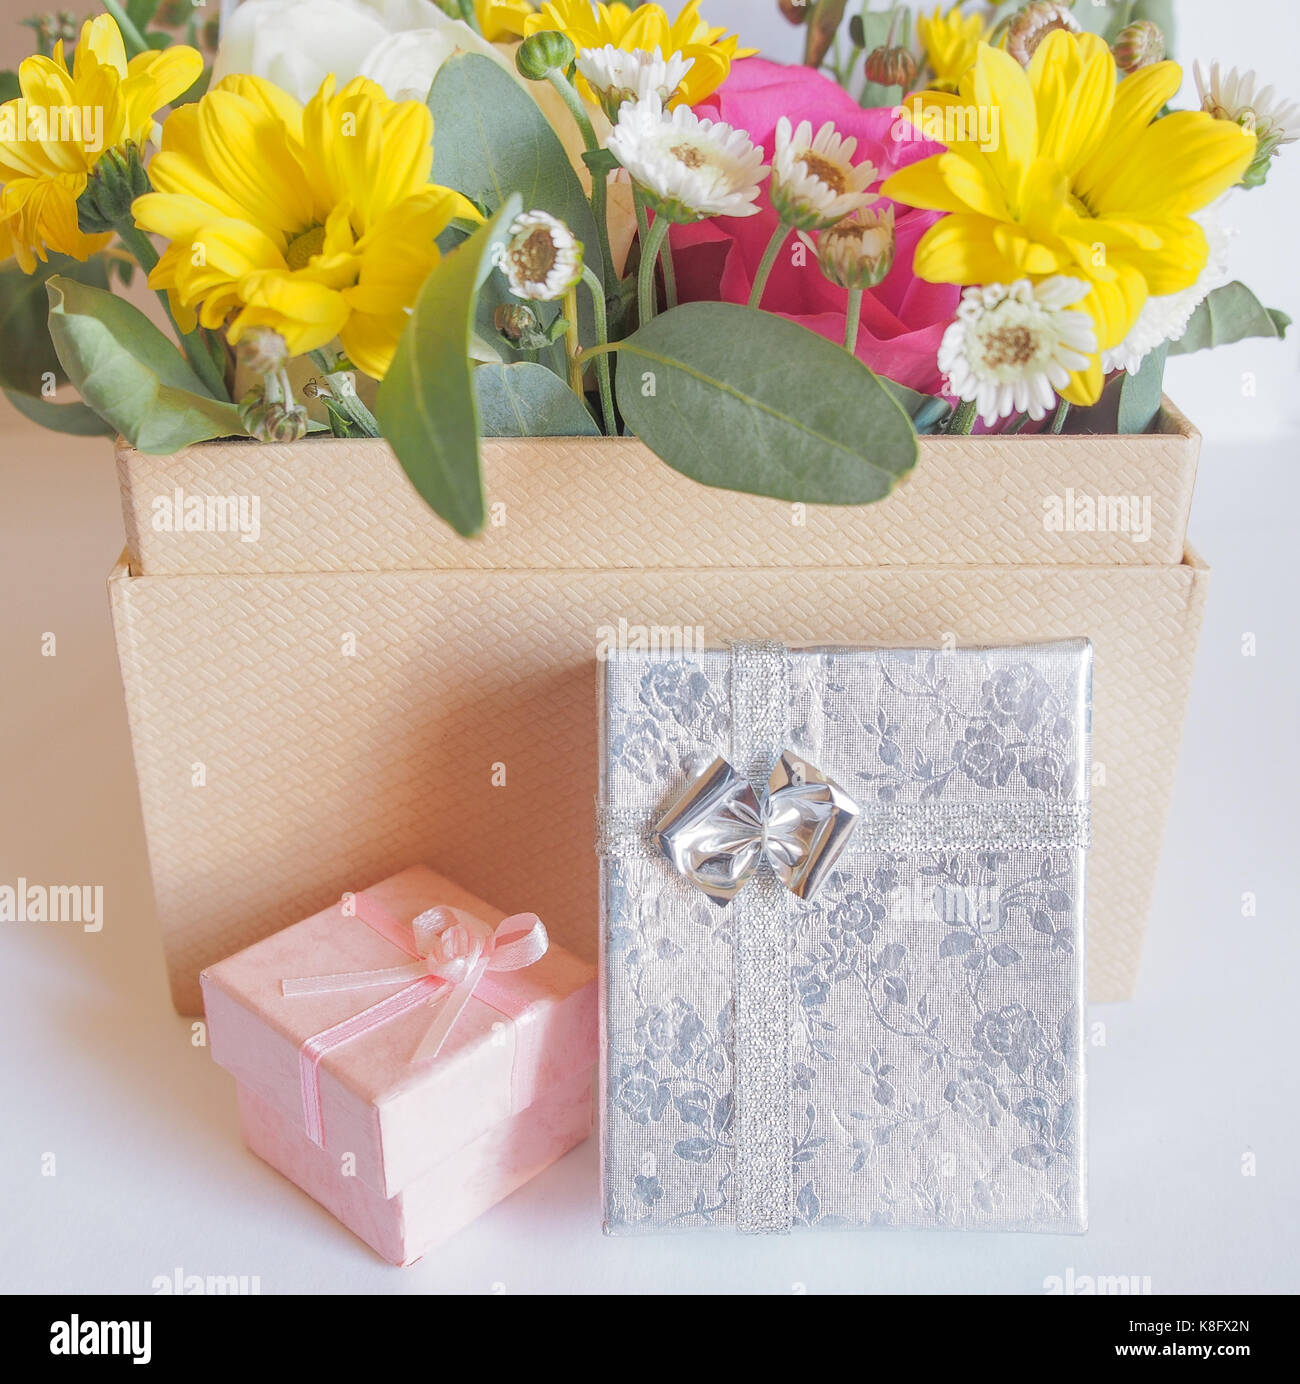 A large box holding a bouquet of flowers and two small gift boxes on a white background. Stock Photo